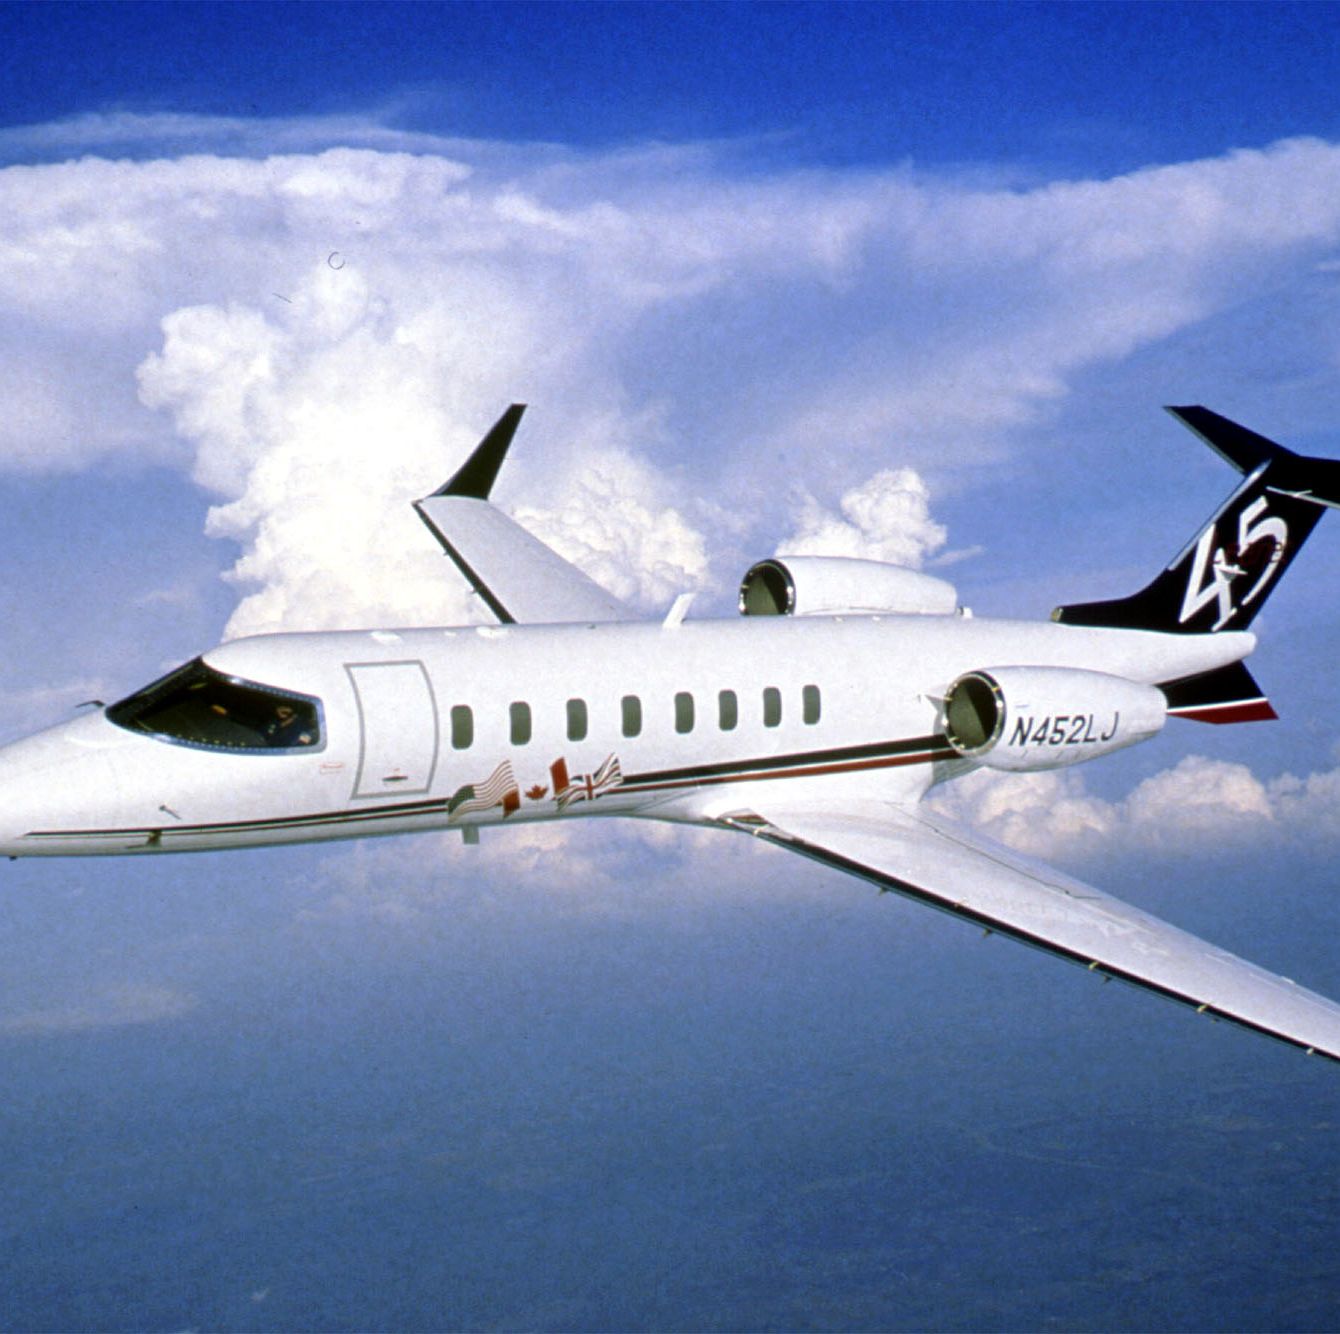 Why the Learjet Is Such a Badass Plane